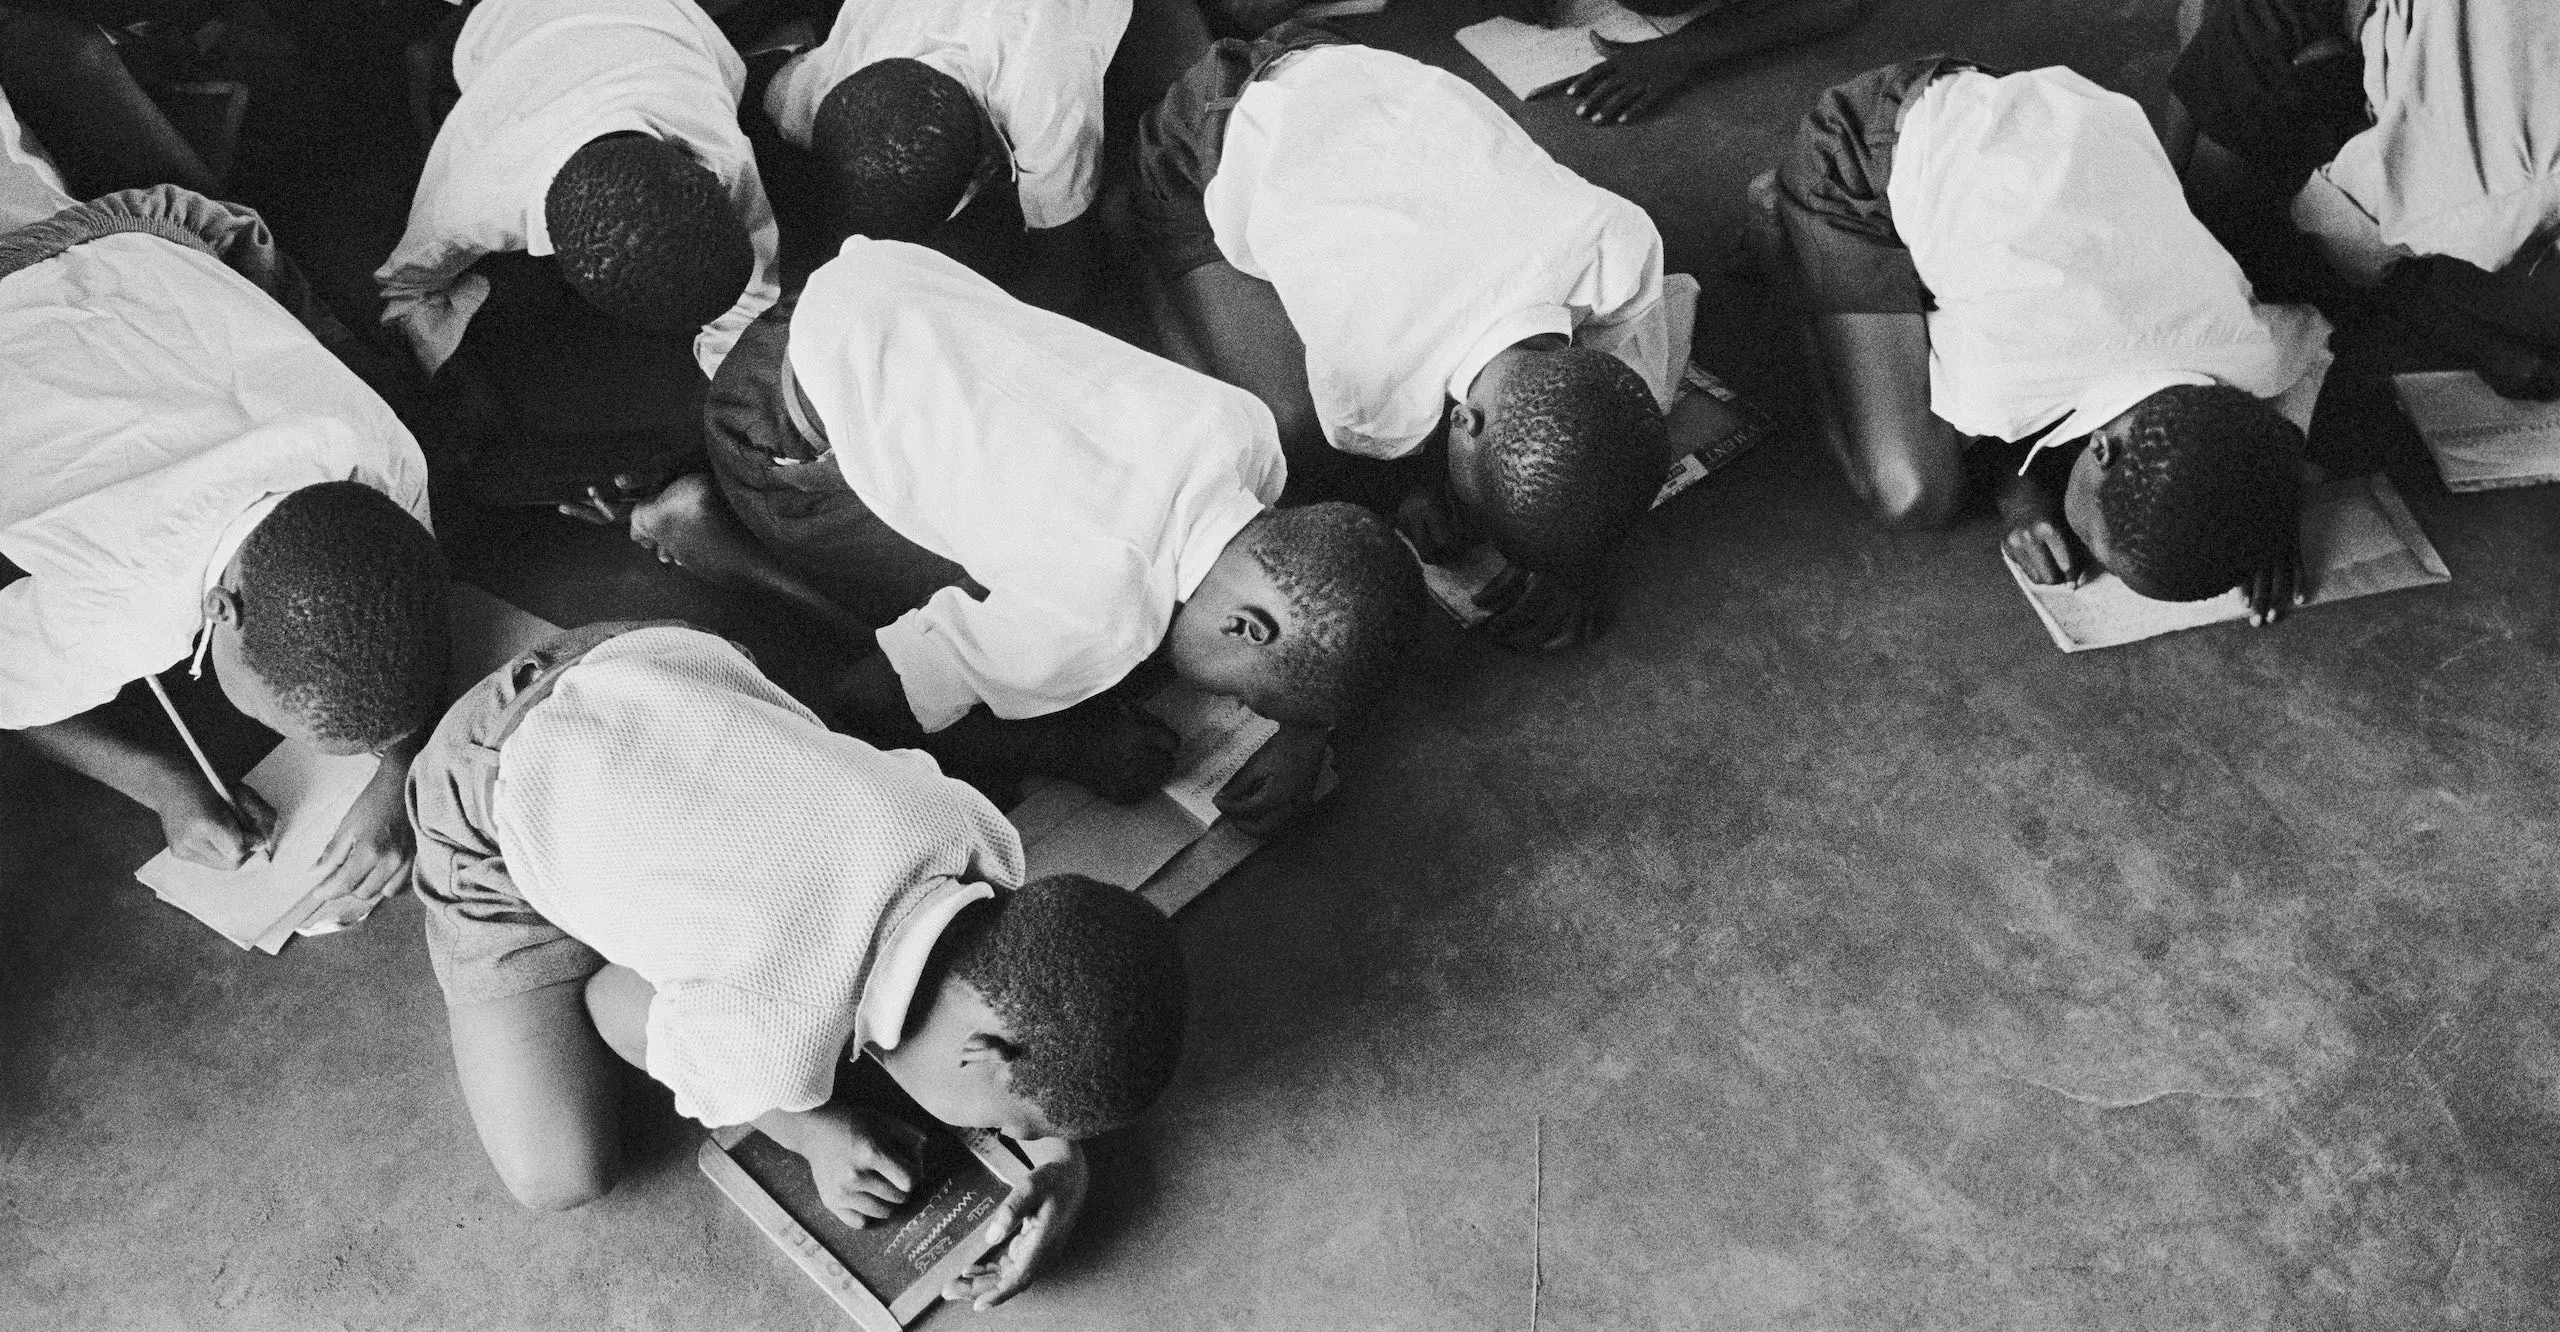 Black and white photograph of several schoolchildren bent over on the floor to write, some write on paper others write on chalkboards.